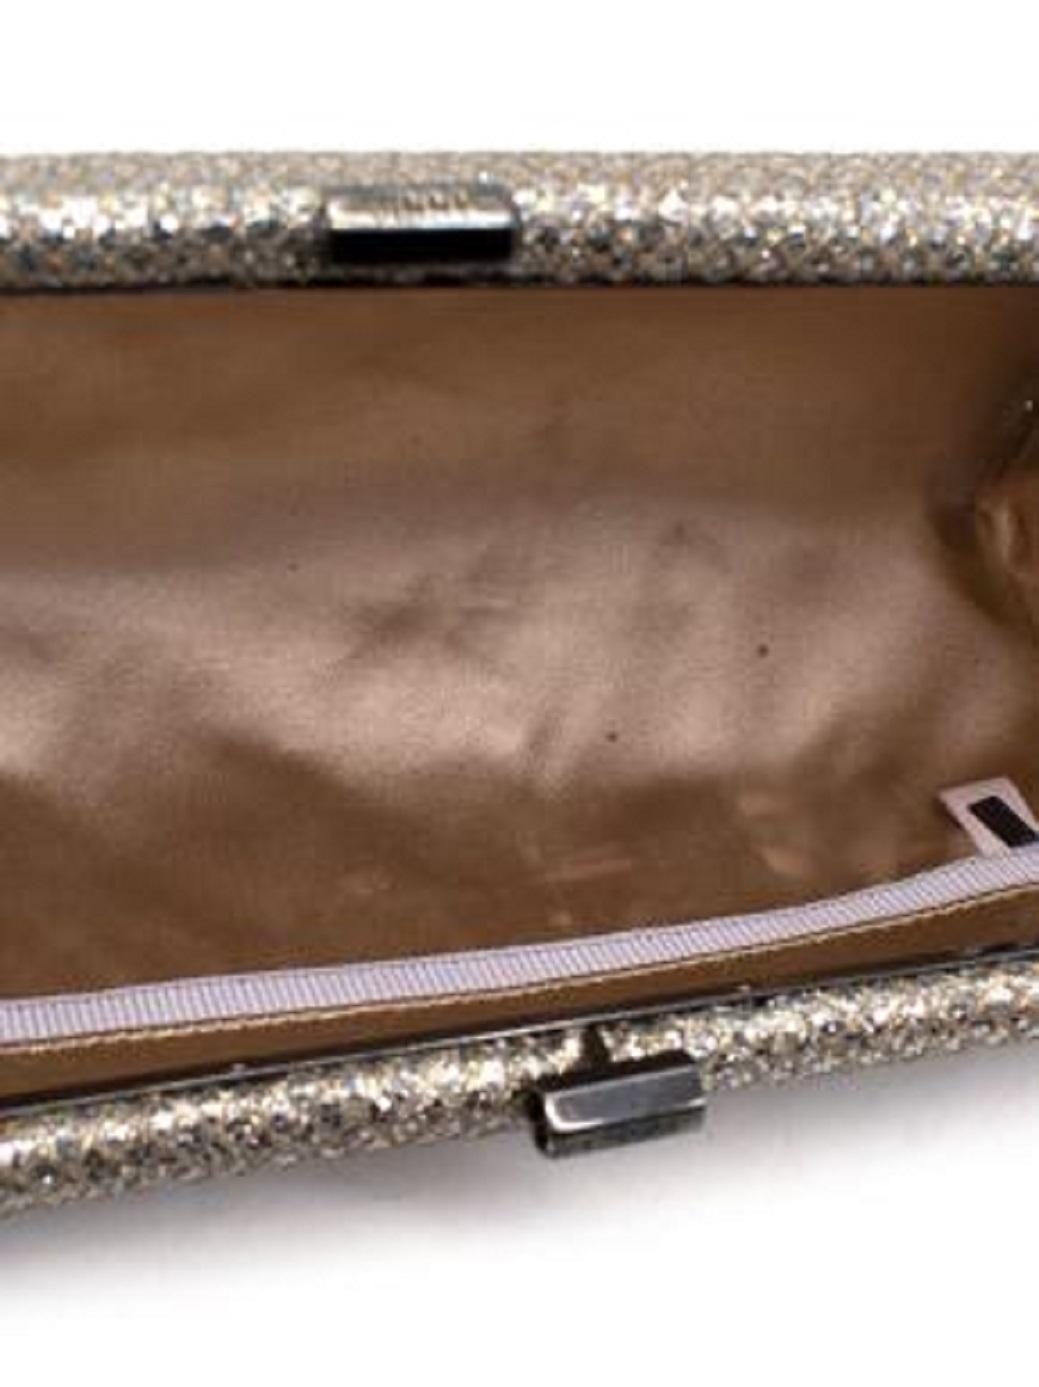 Jimmy Choo Champagne Sequin Embellished Clutch For Sale 5